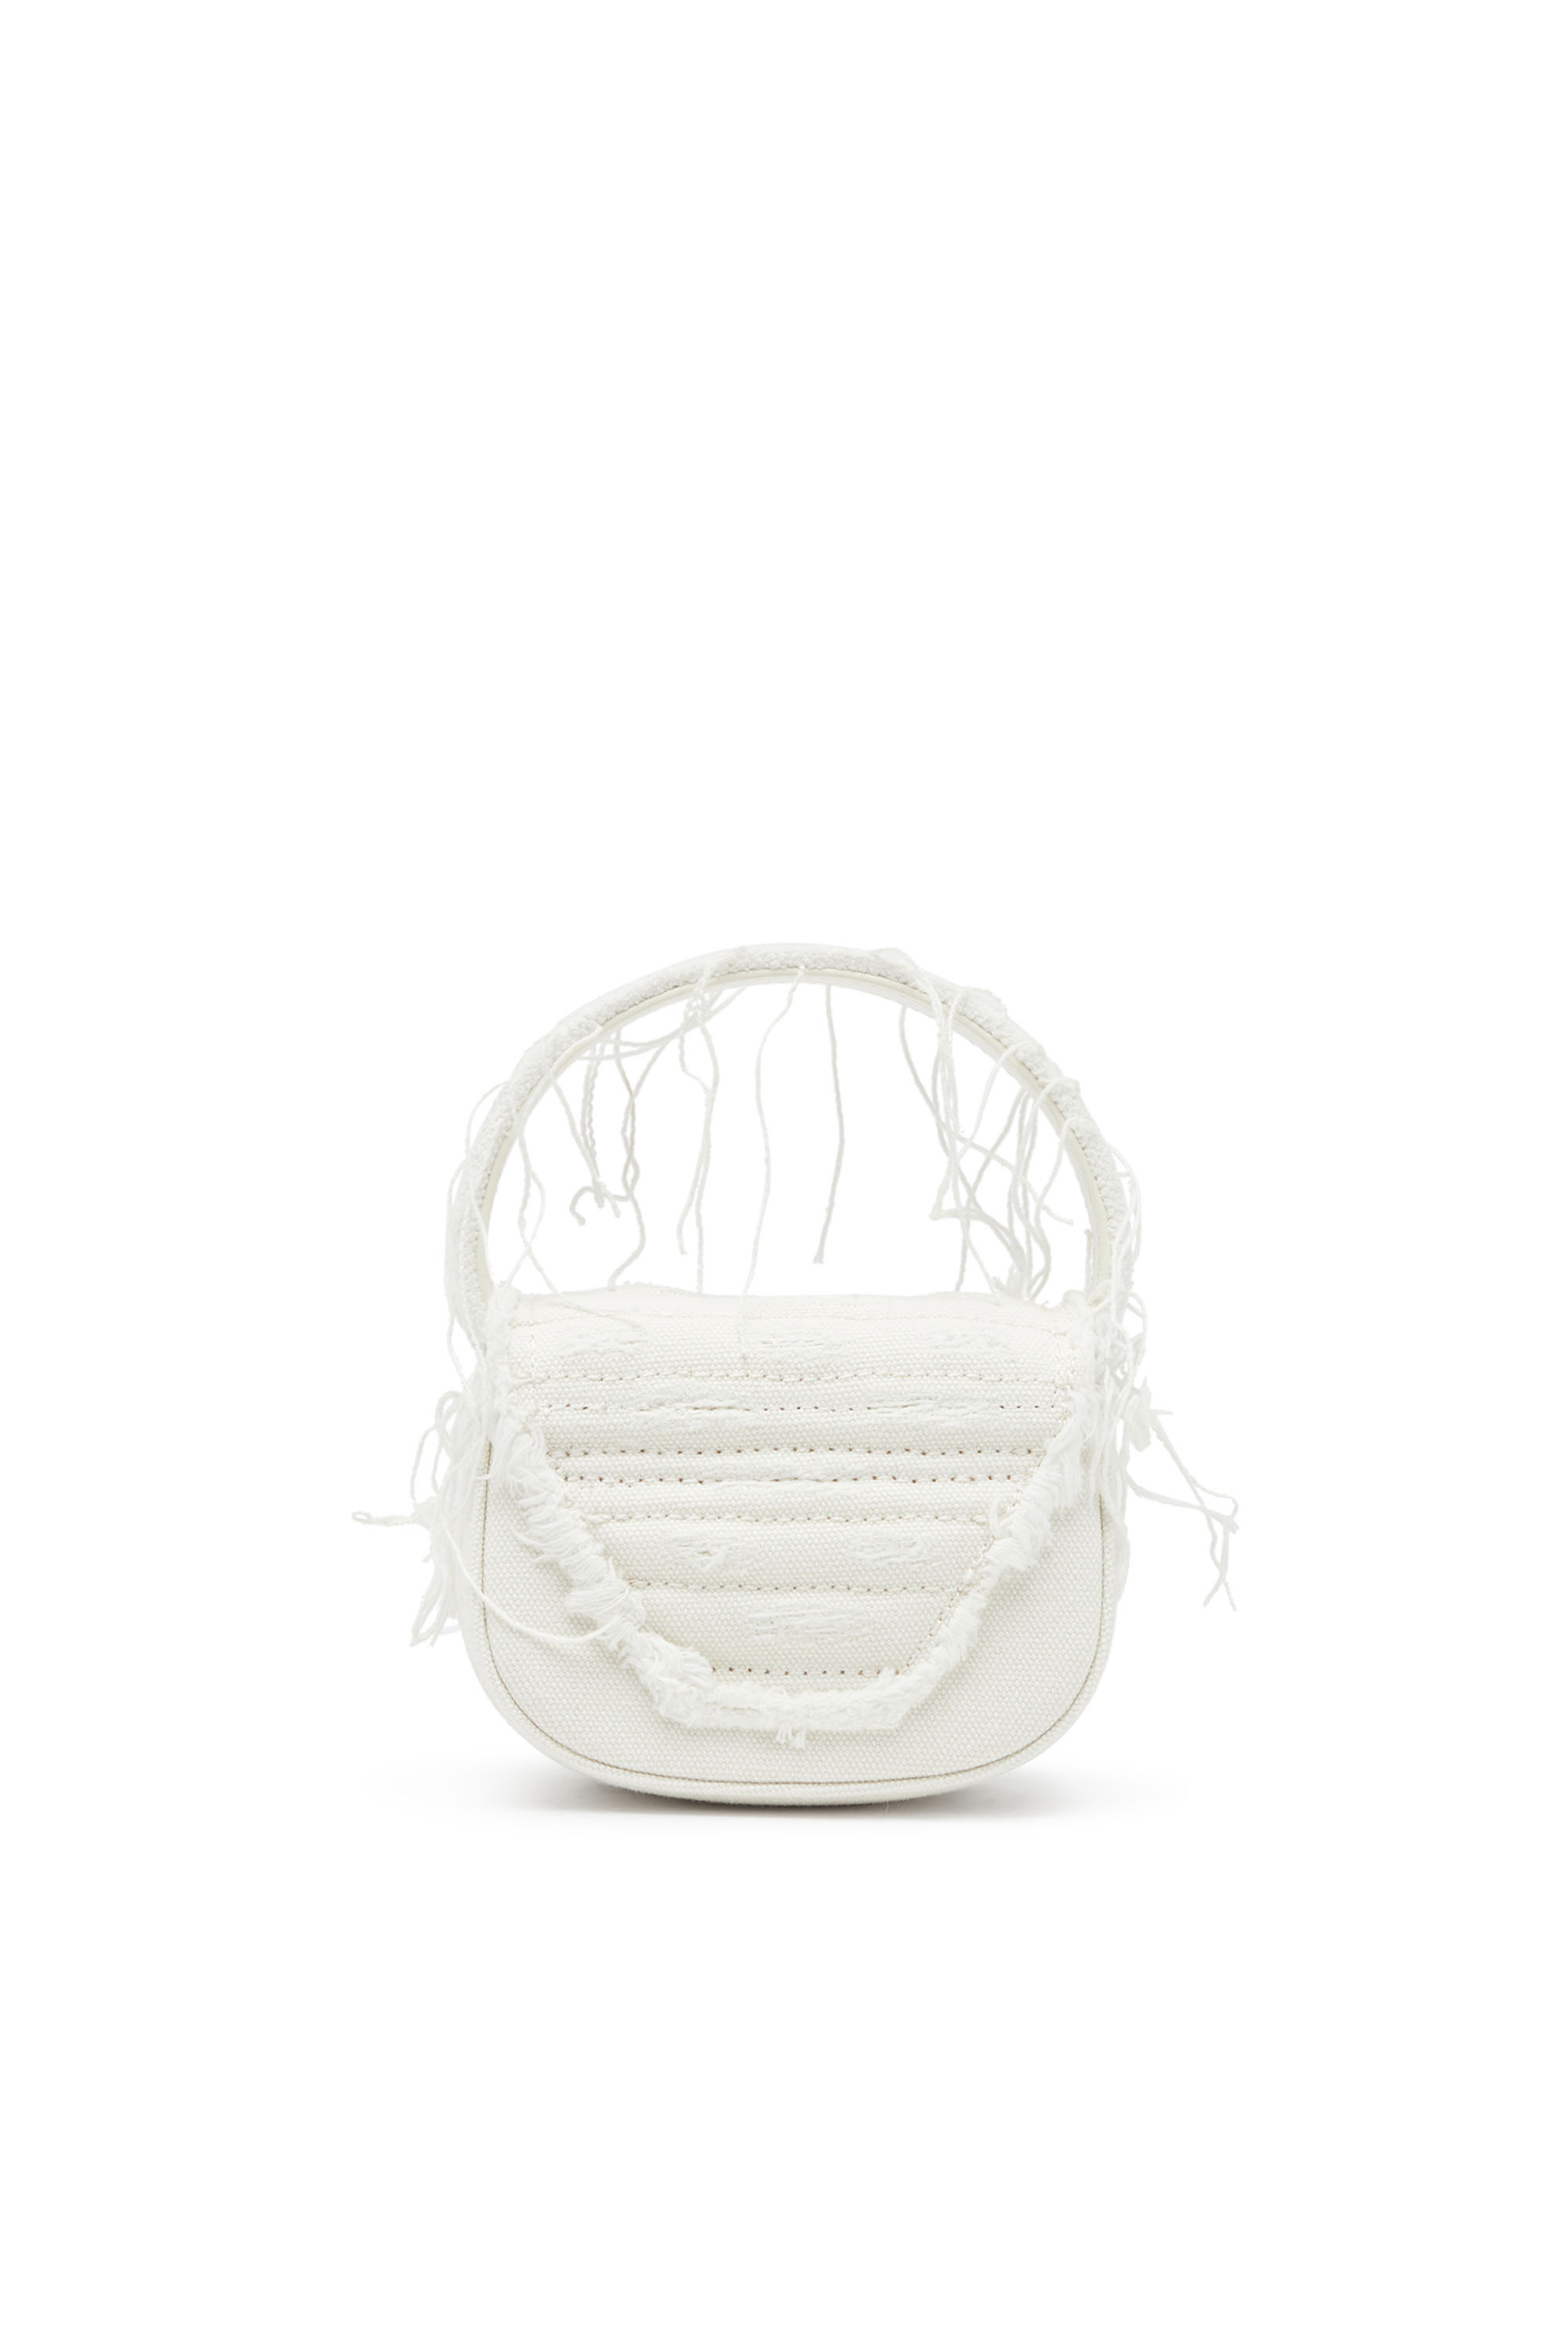 Diesel - 1DR XS, Woman 1DR XS-Iconic mini bag in canvas and leather in White - Image 2